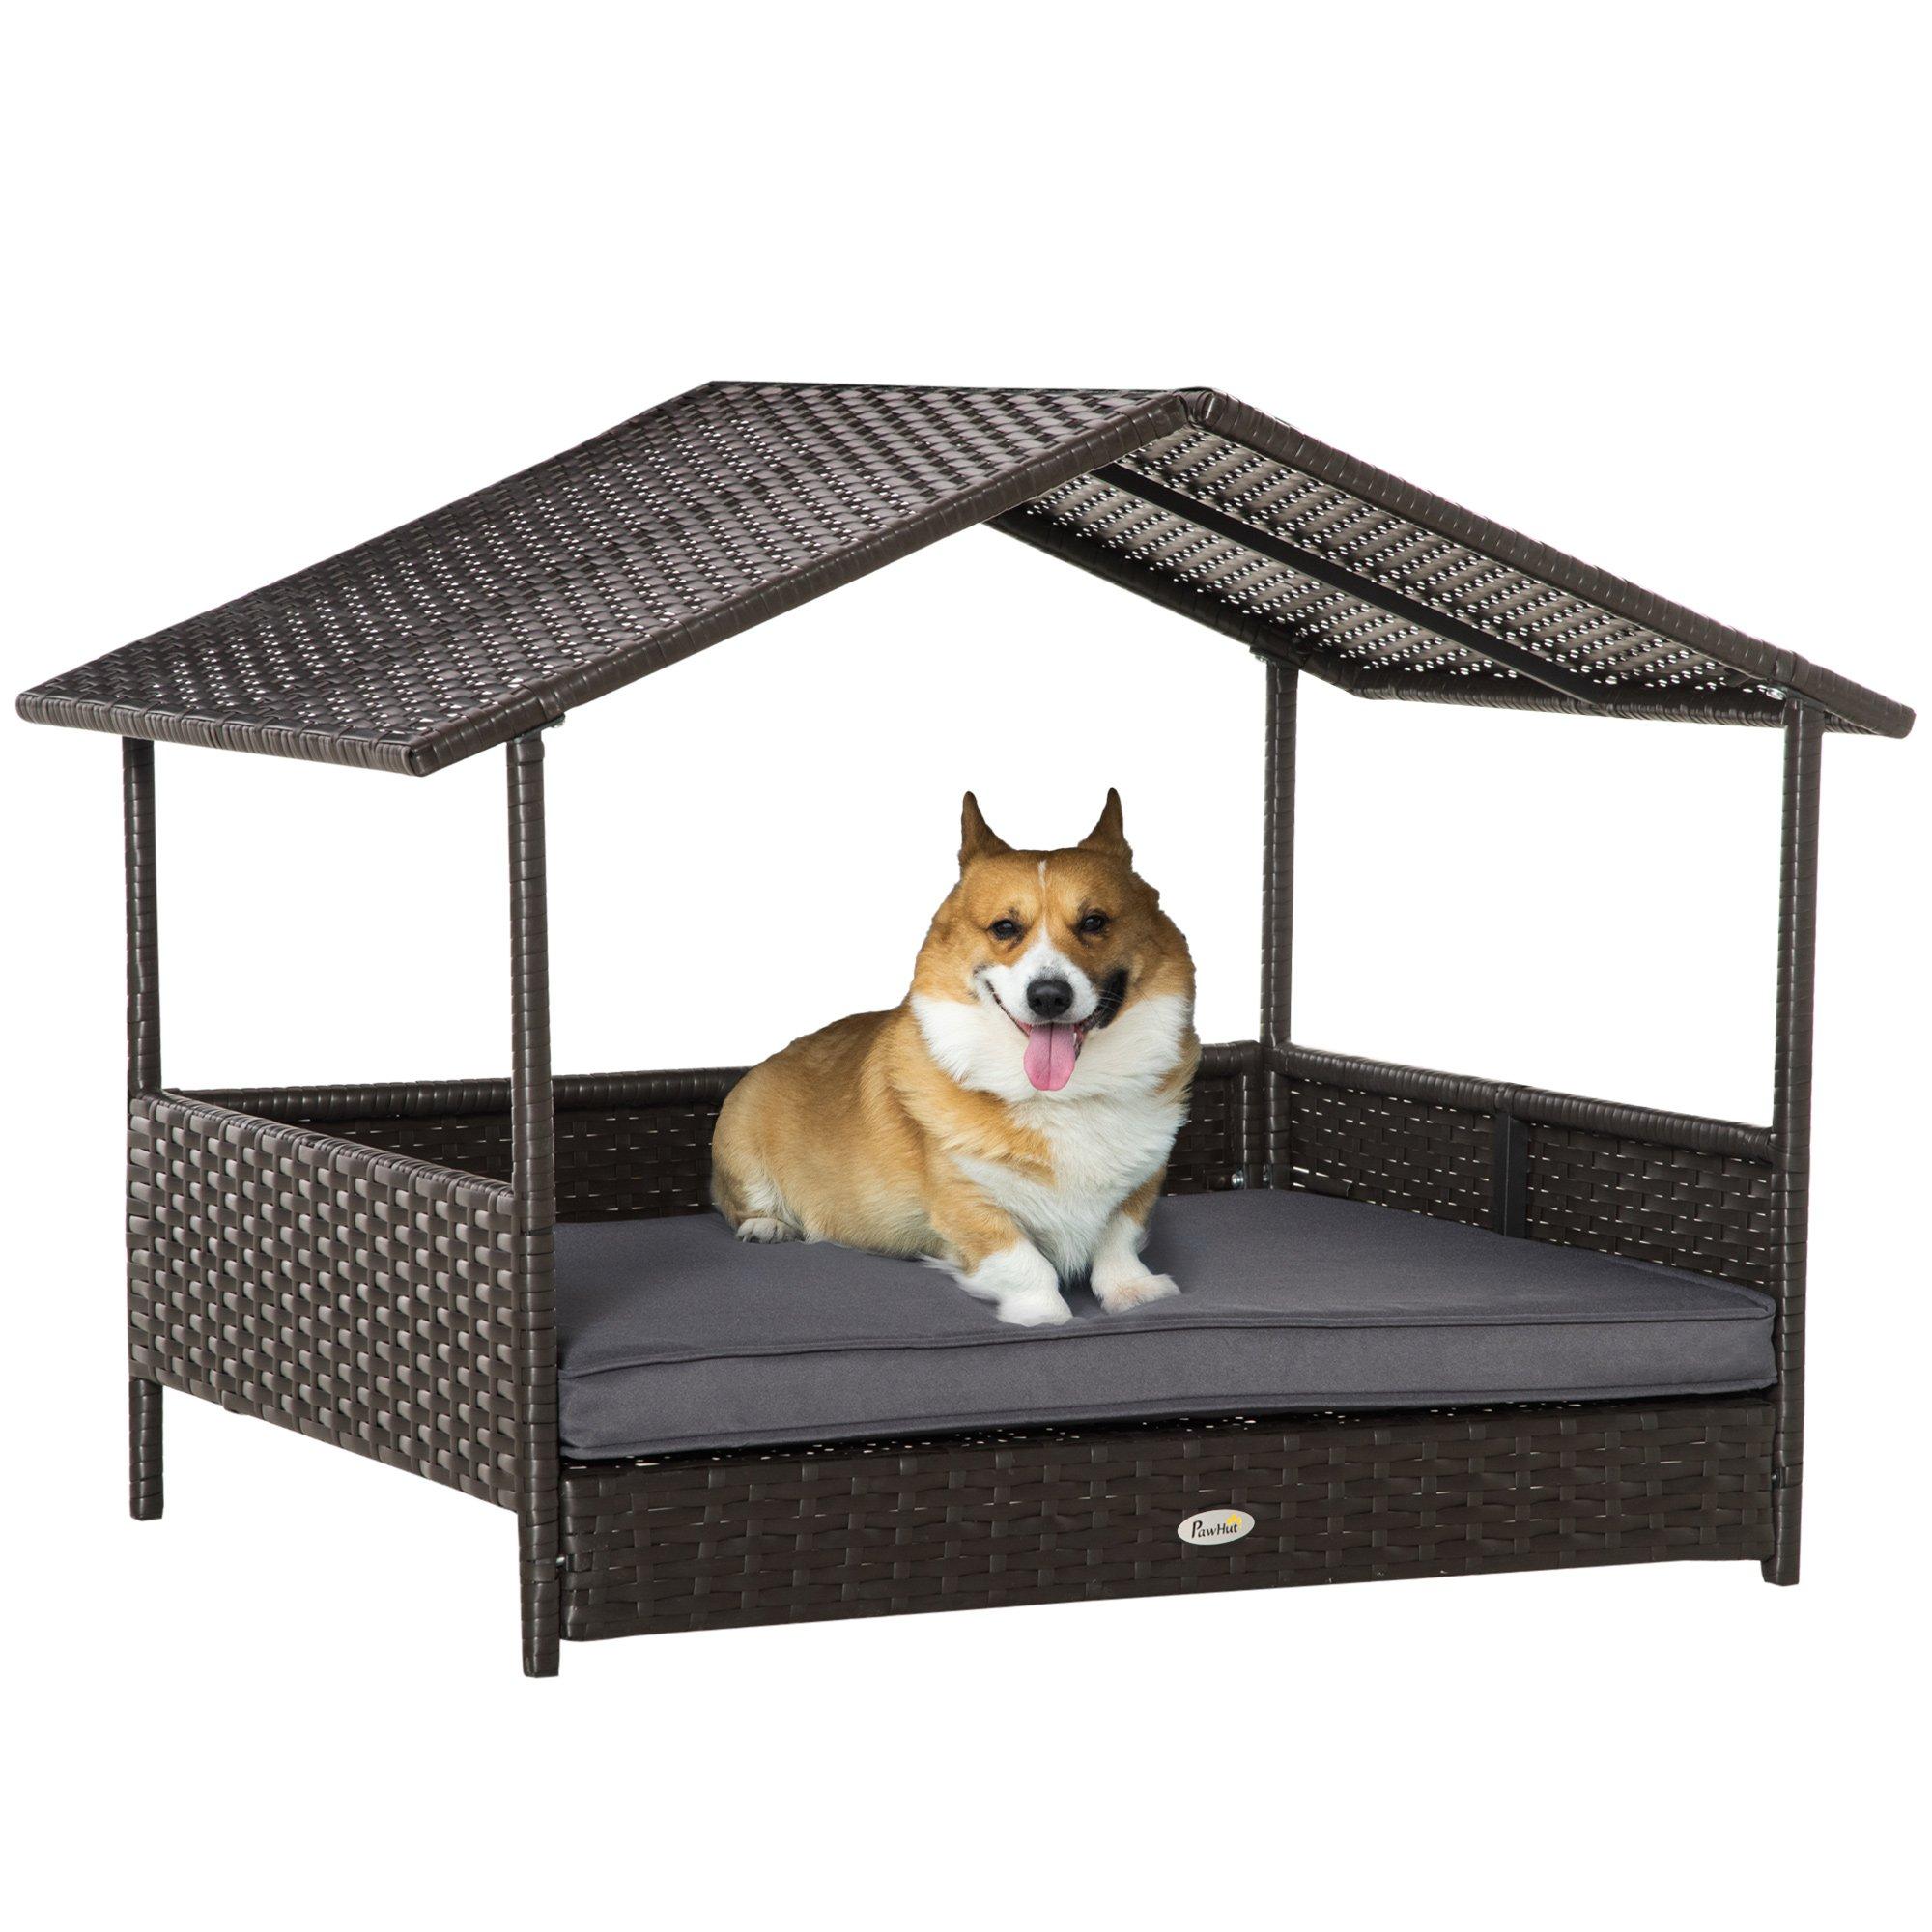 Wicker Dog House, Rattan Pet Bed with Soft Cushion, Canopy, Cat House